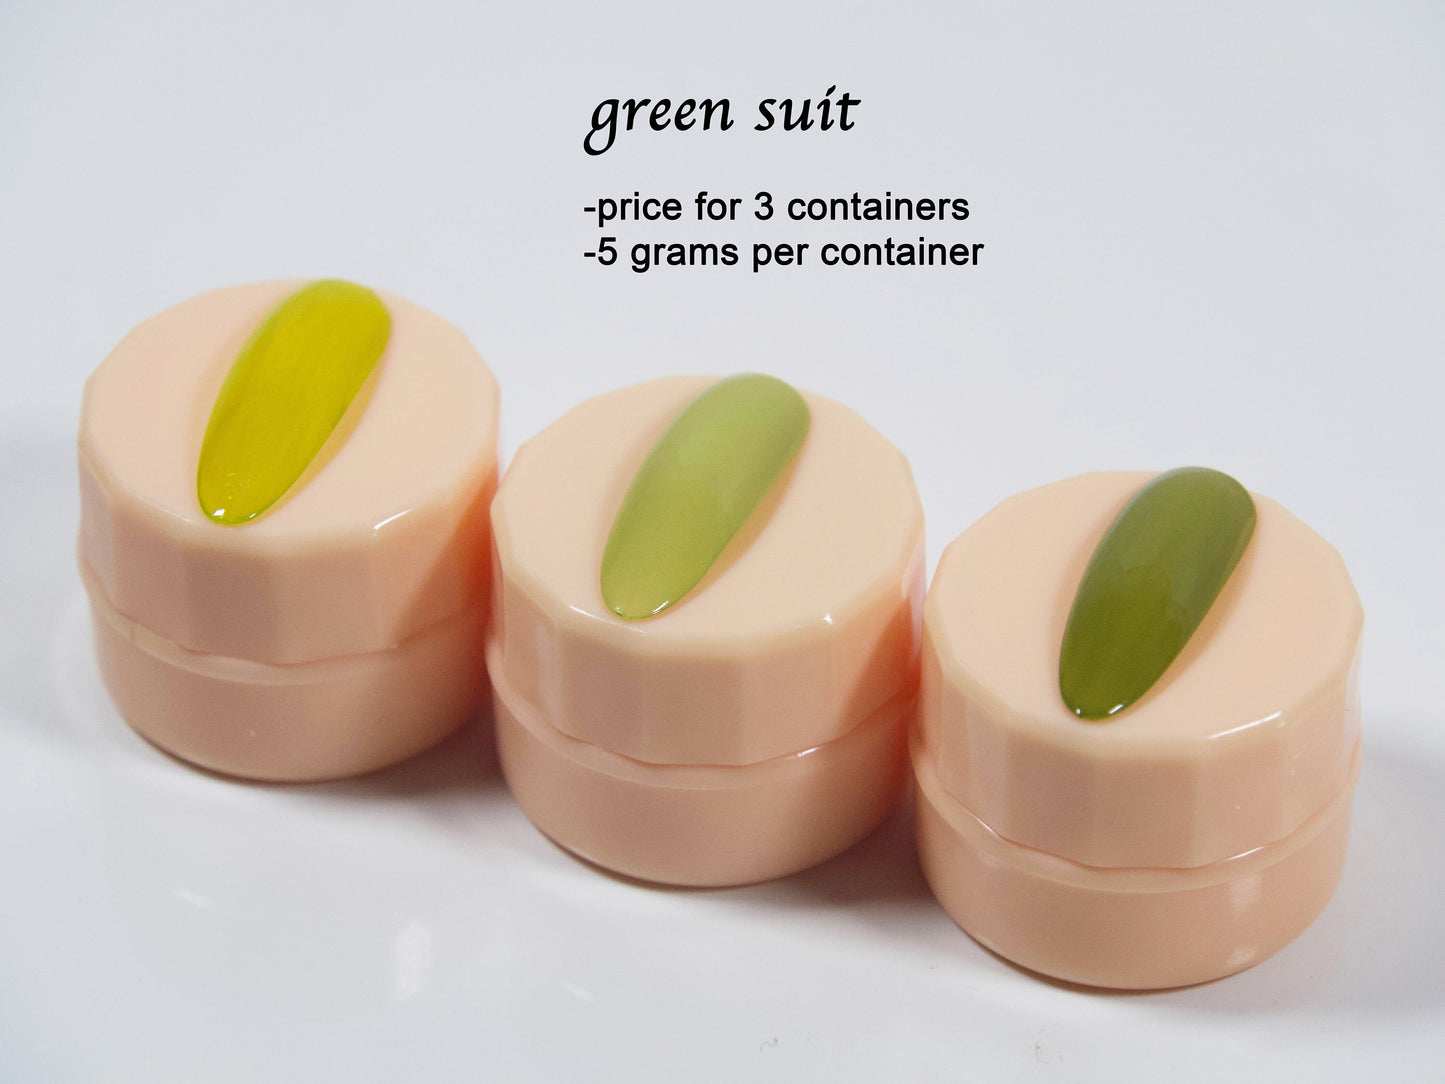 3pcs Solid Jelly UV Gel Nail Art /Refreshing Green suit Gel Polish/ Olive Avocado lime Greens Pudding UV Gels Creamy Gel Manicure Pedicure